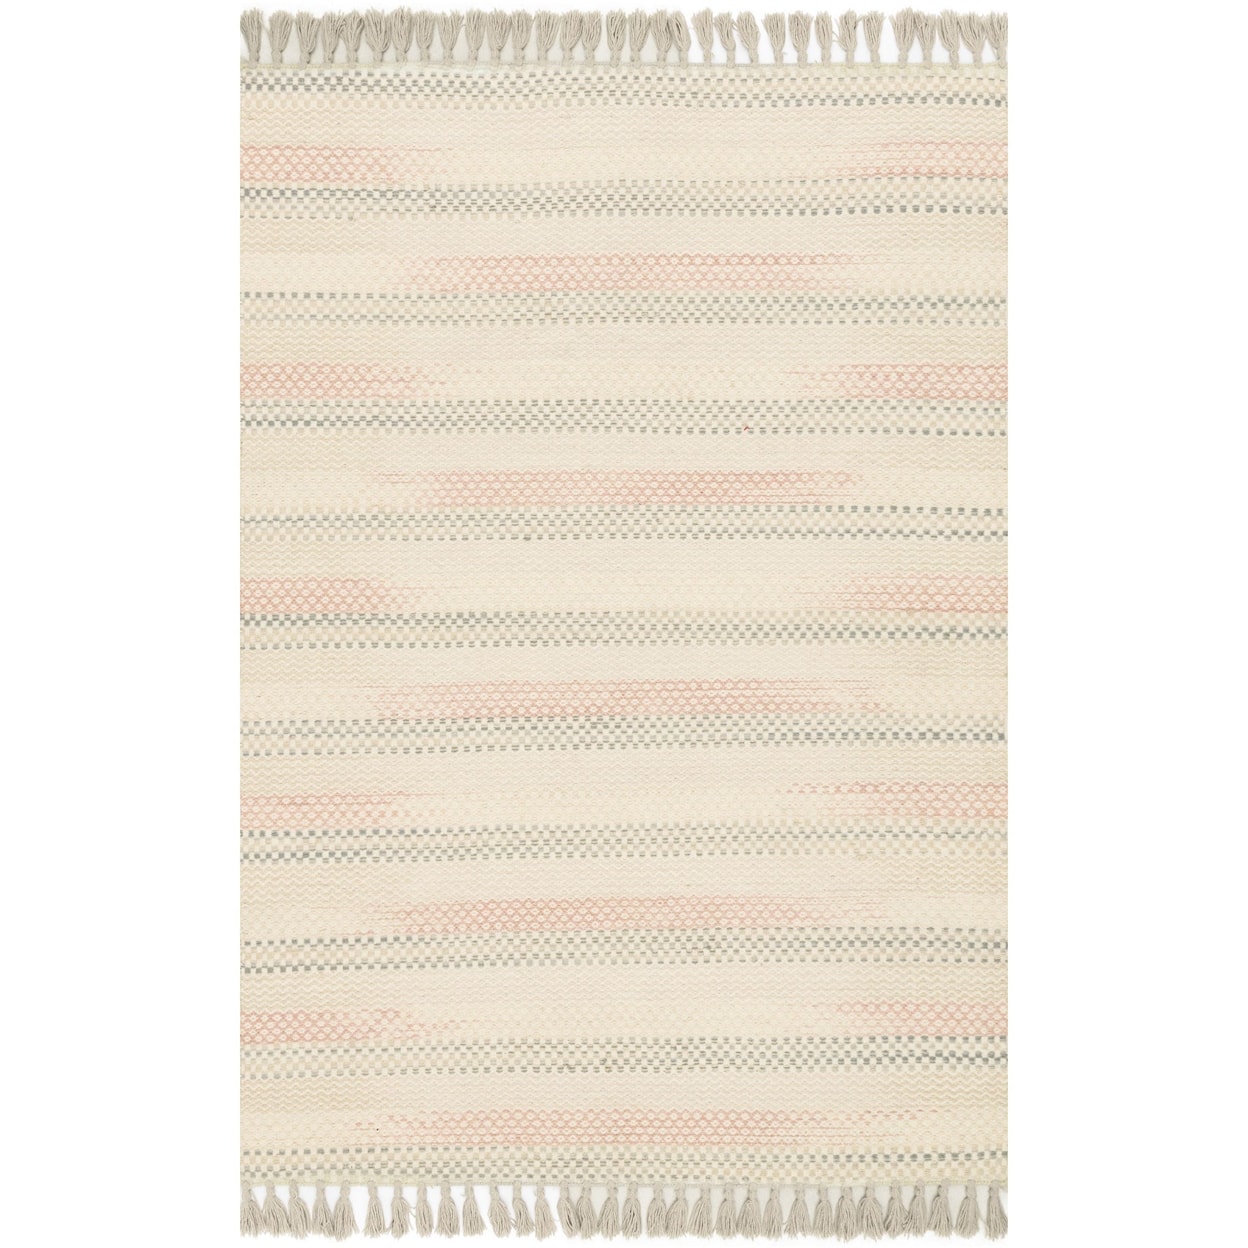 Magnolia Home by Joanna Gaines for Loloi Chantilly 3' 6" x 5' 6" Rectangle Rug